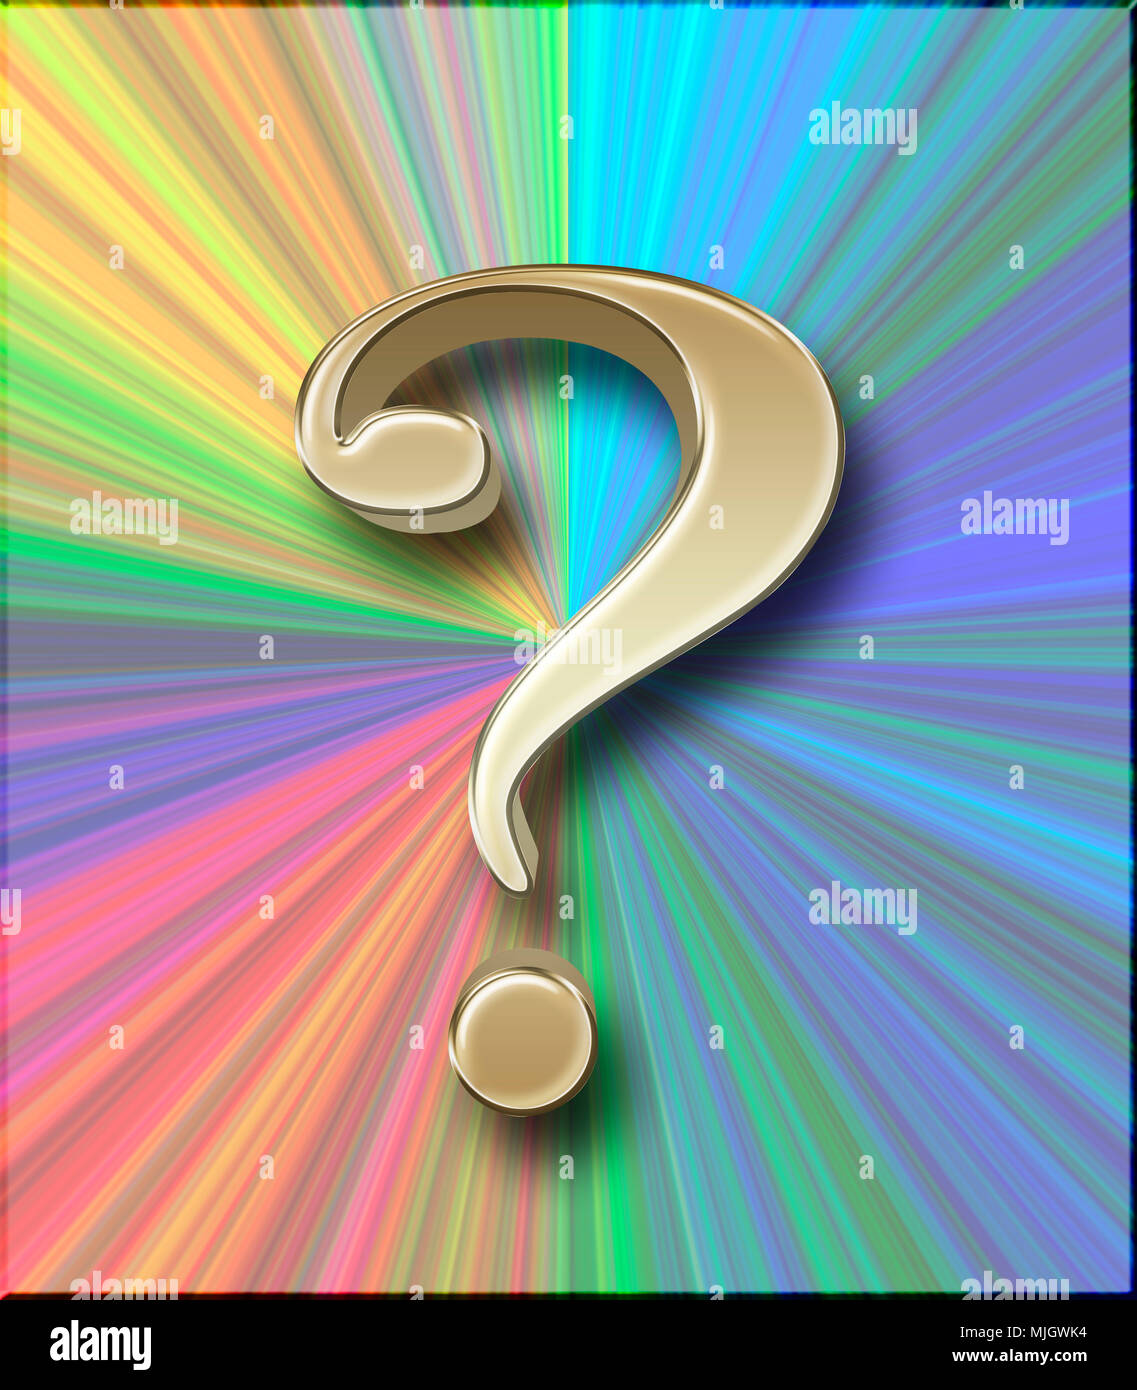 Stock Illustration - Large Three Dimensional Golden Question Mark , 3D Illustration, Isolated against the Rainbow Colored Background. Stock Photo